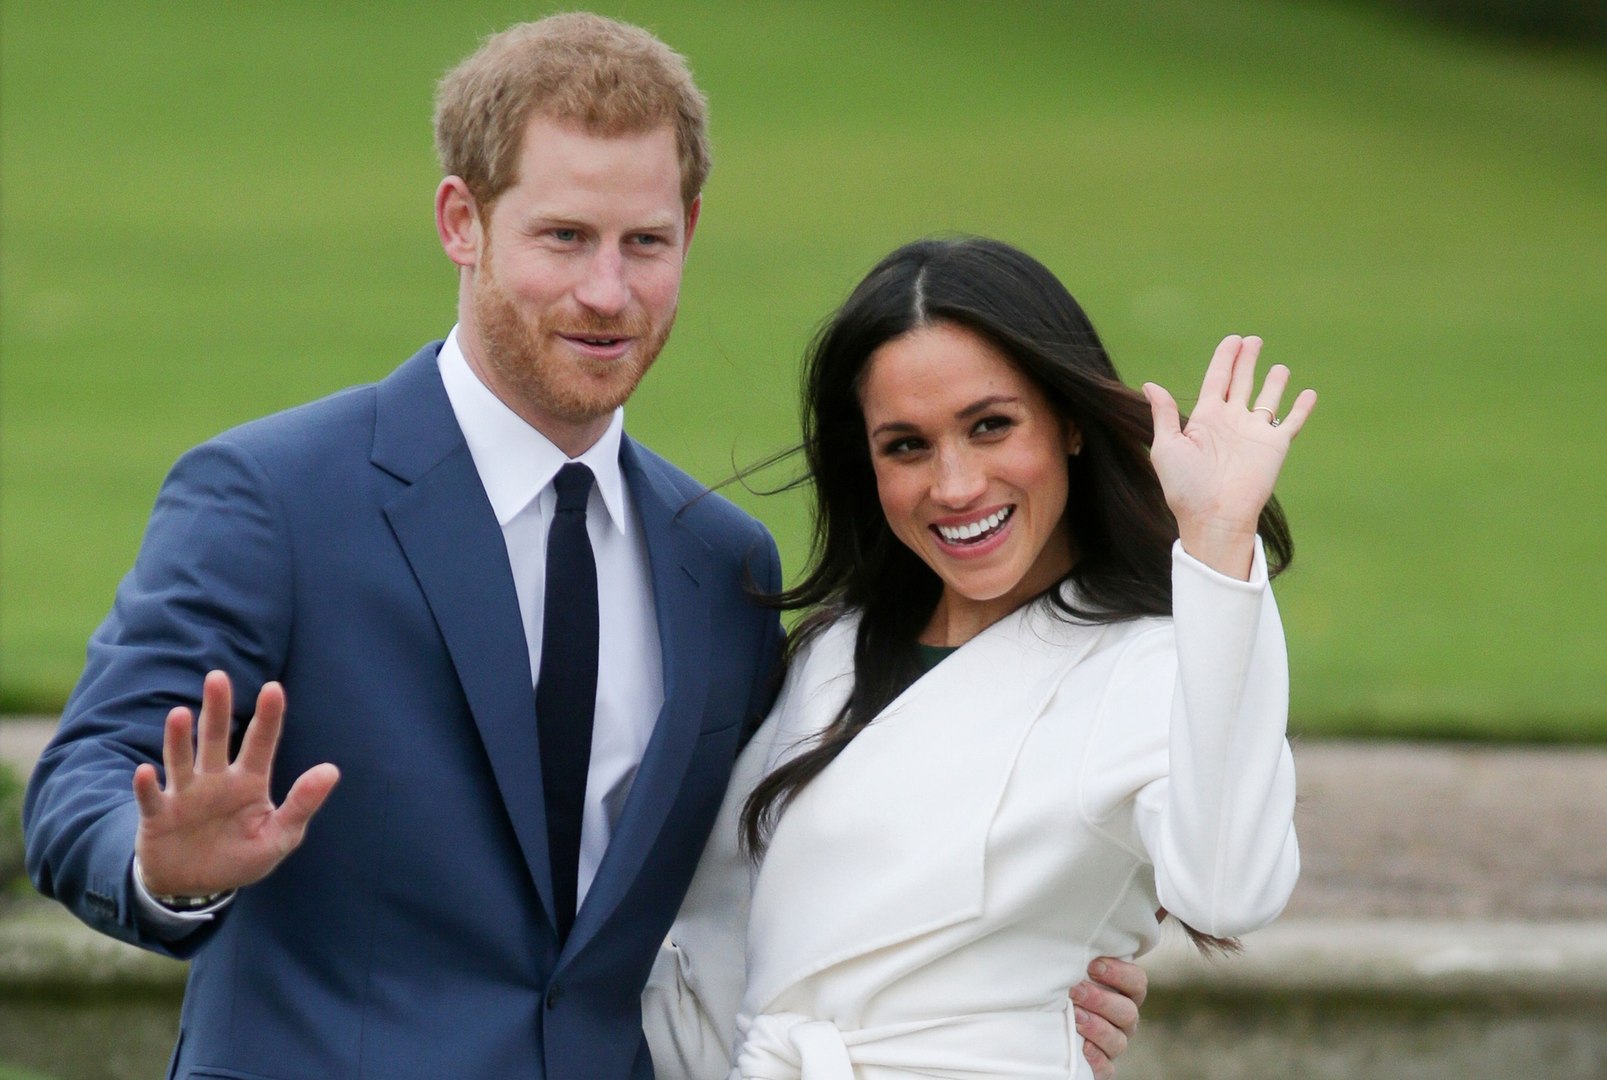 Prince Harry And Meghan Markle Are Breaking Royal Tradition With Their Wedding Cake Choice And More 